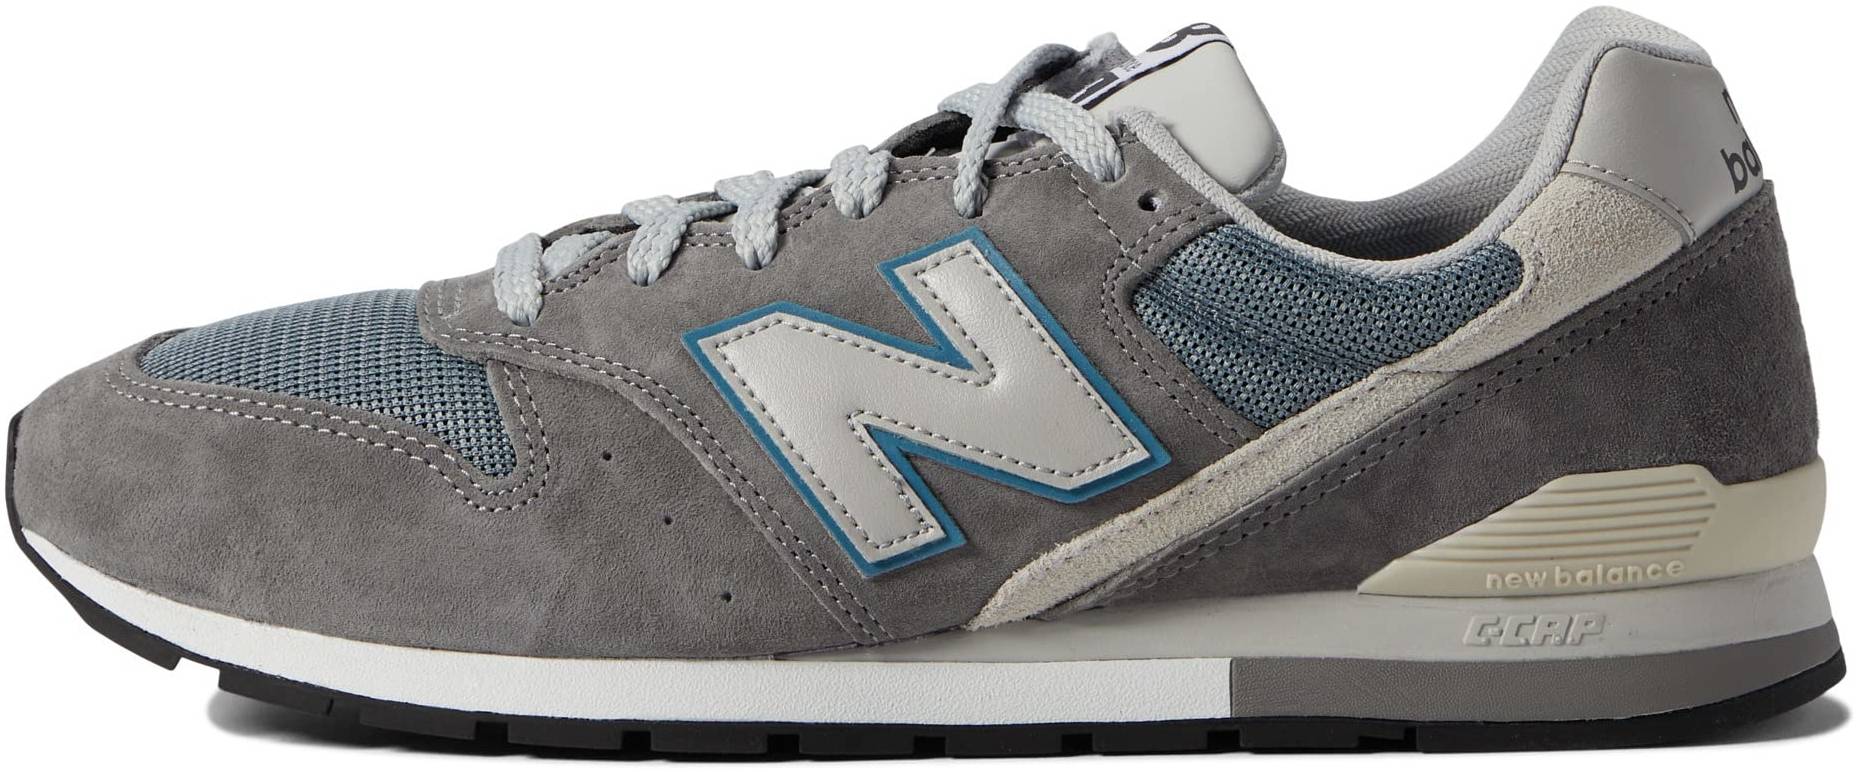 Balance 996 sneakers 9 colors (only $60) RunRepeat